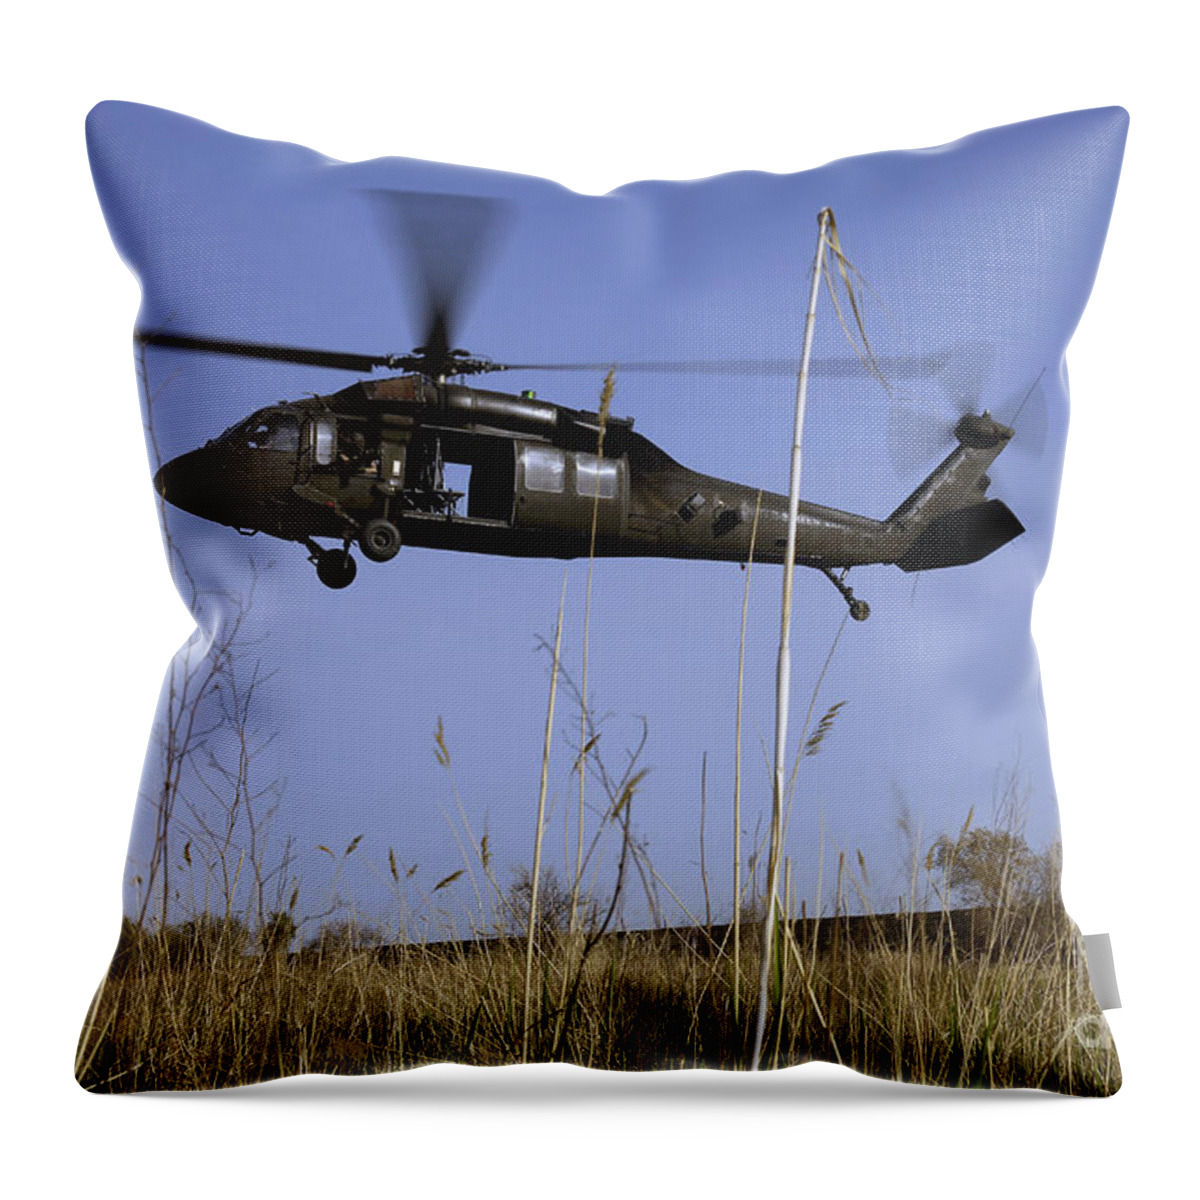 Adults Only Throw Pillow featuring the photograph A U.s. Army Uh-60 Black Hawk Helicopter by Stocktrek Images